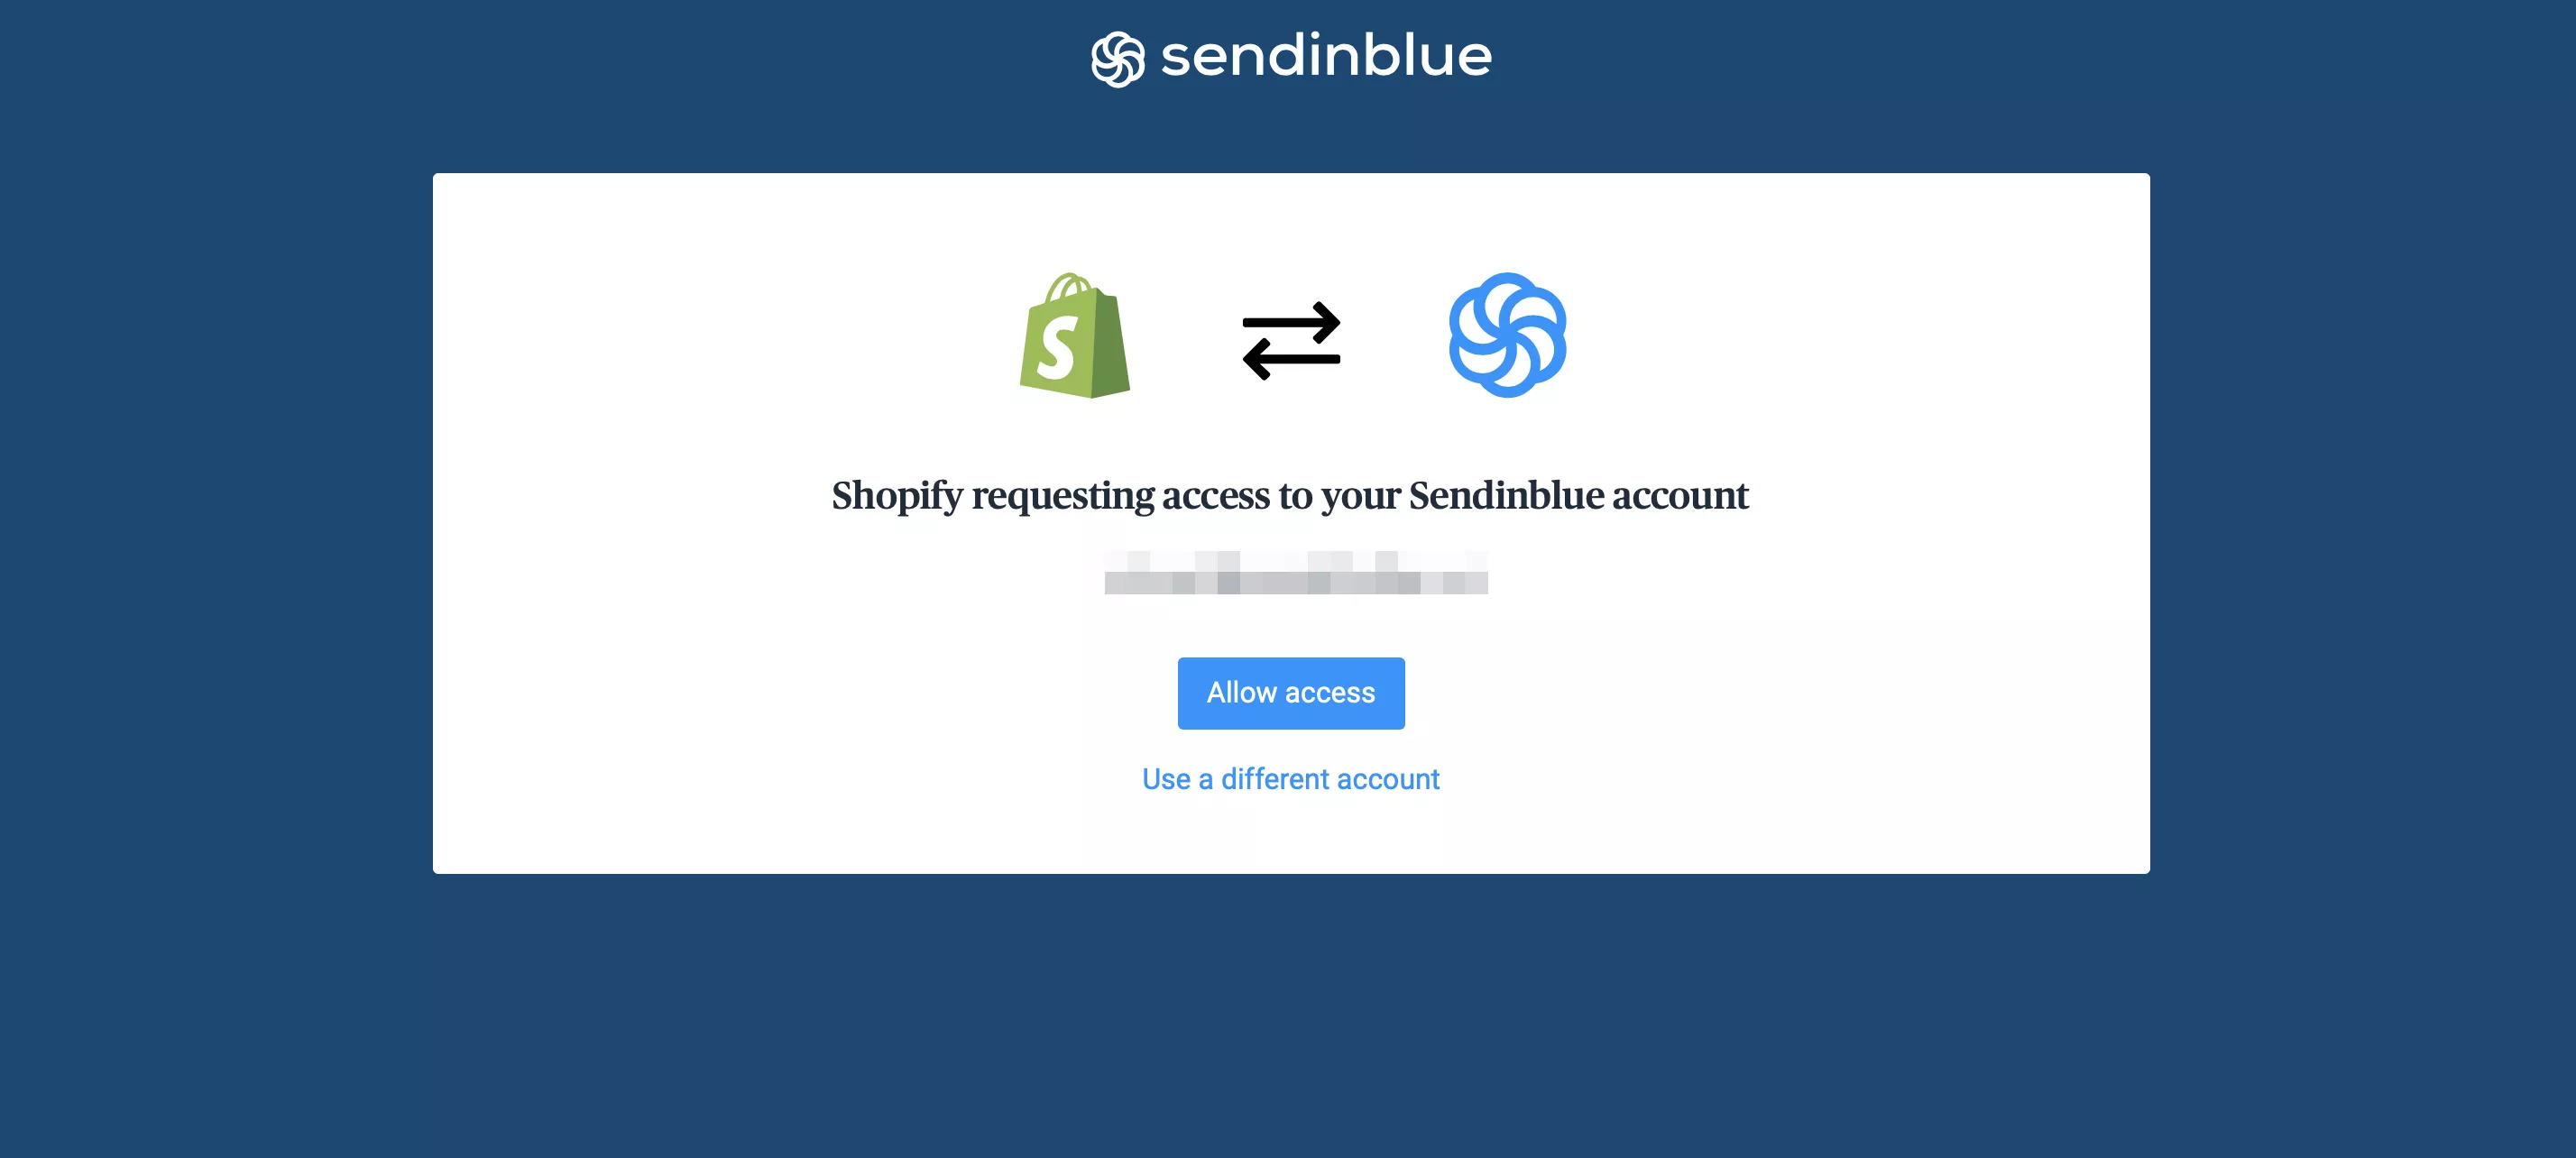 Allow shopify to access your sendinblue account